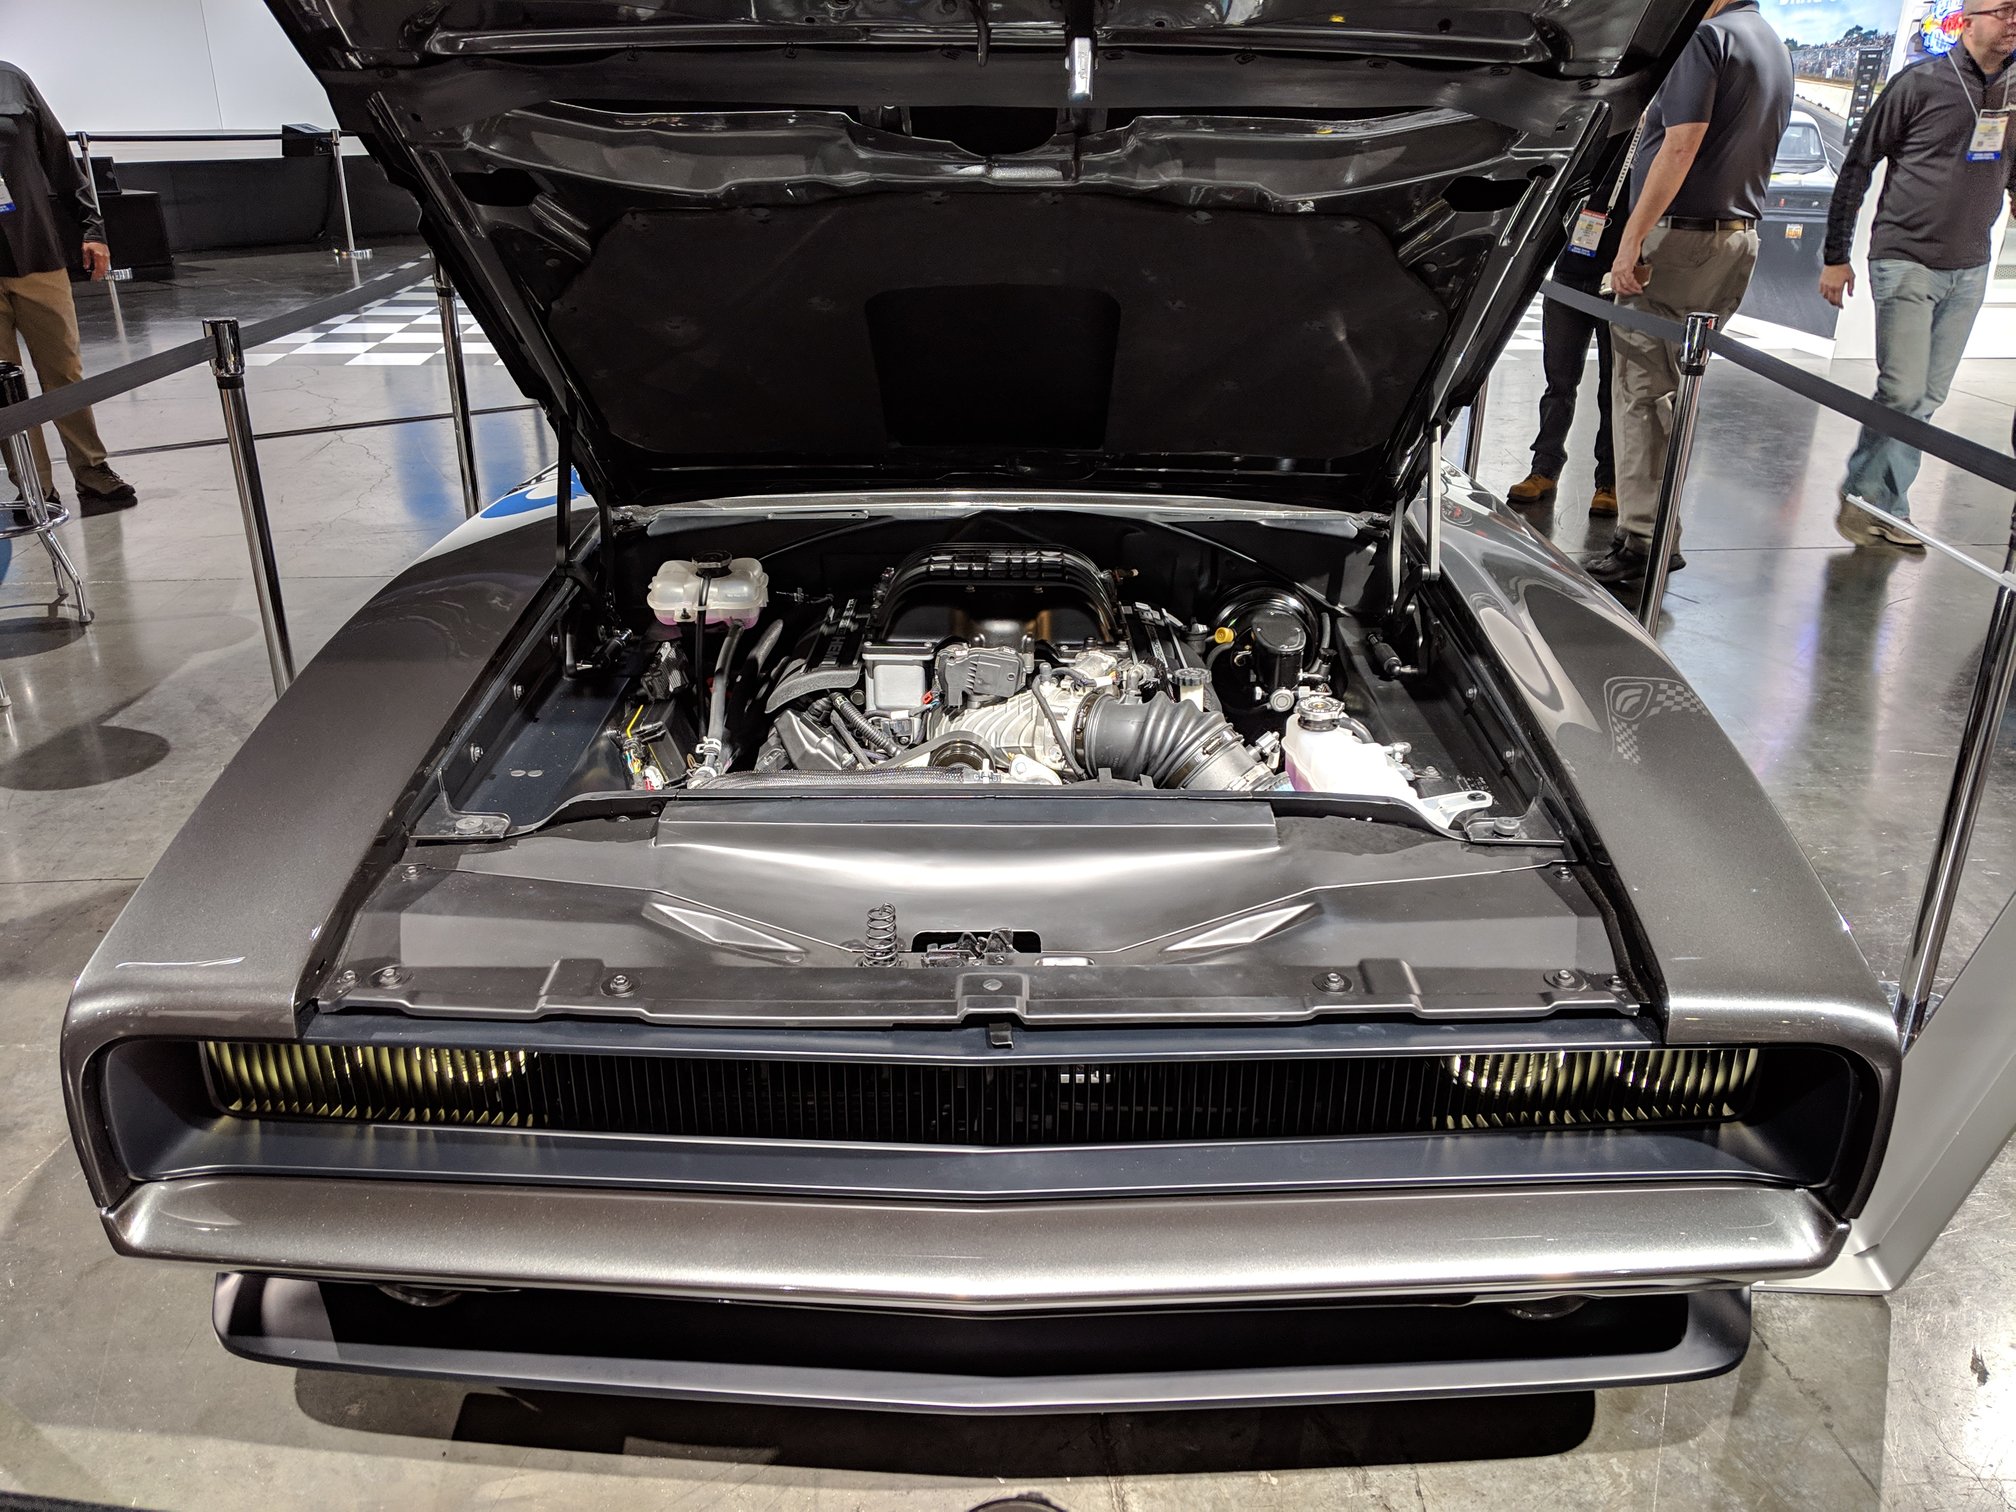 Dodge “Super Charger” with 1,000hp Hellephant Engine at SEMA 2018